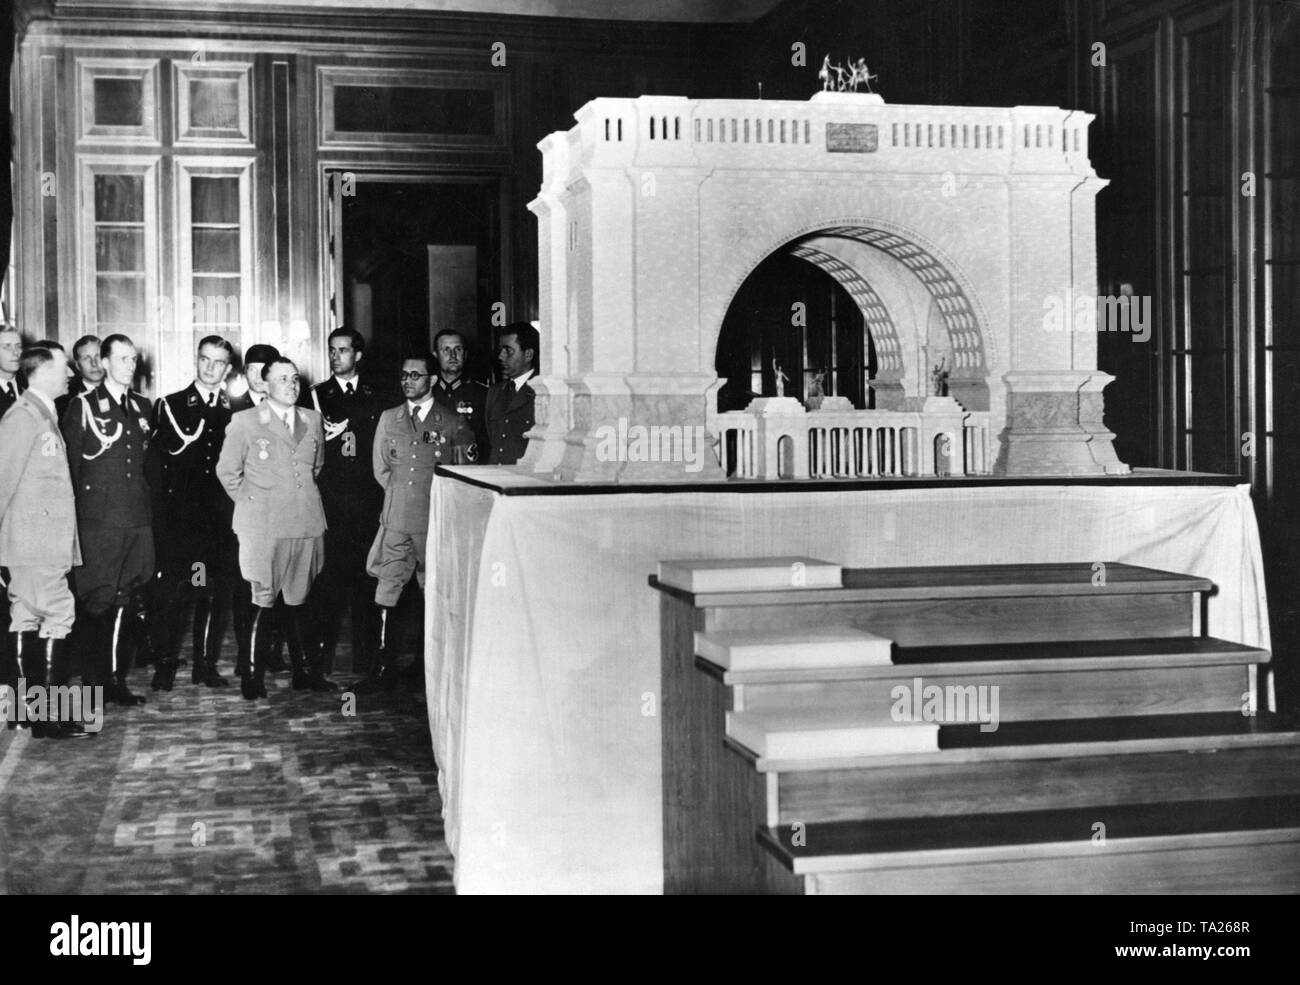 Adolf Hitler and other party functionaries inspect the modell of the triumphal arch, which was planned to be built after the end of the war in Berlin. Undated picture. Stock Photo